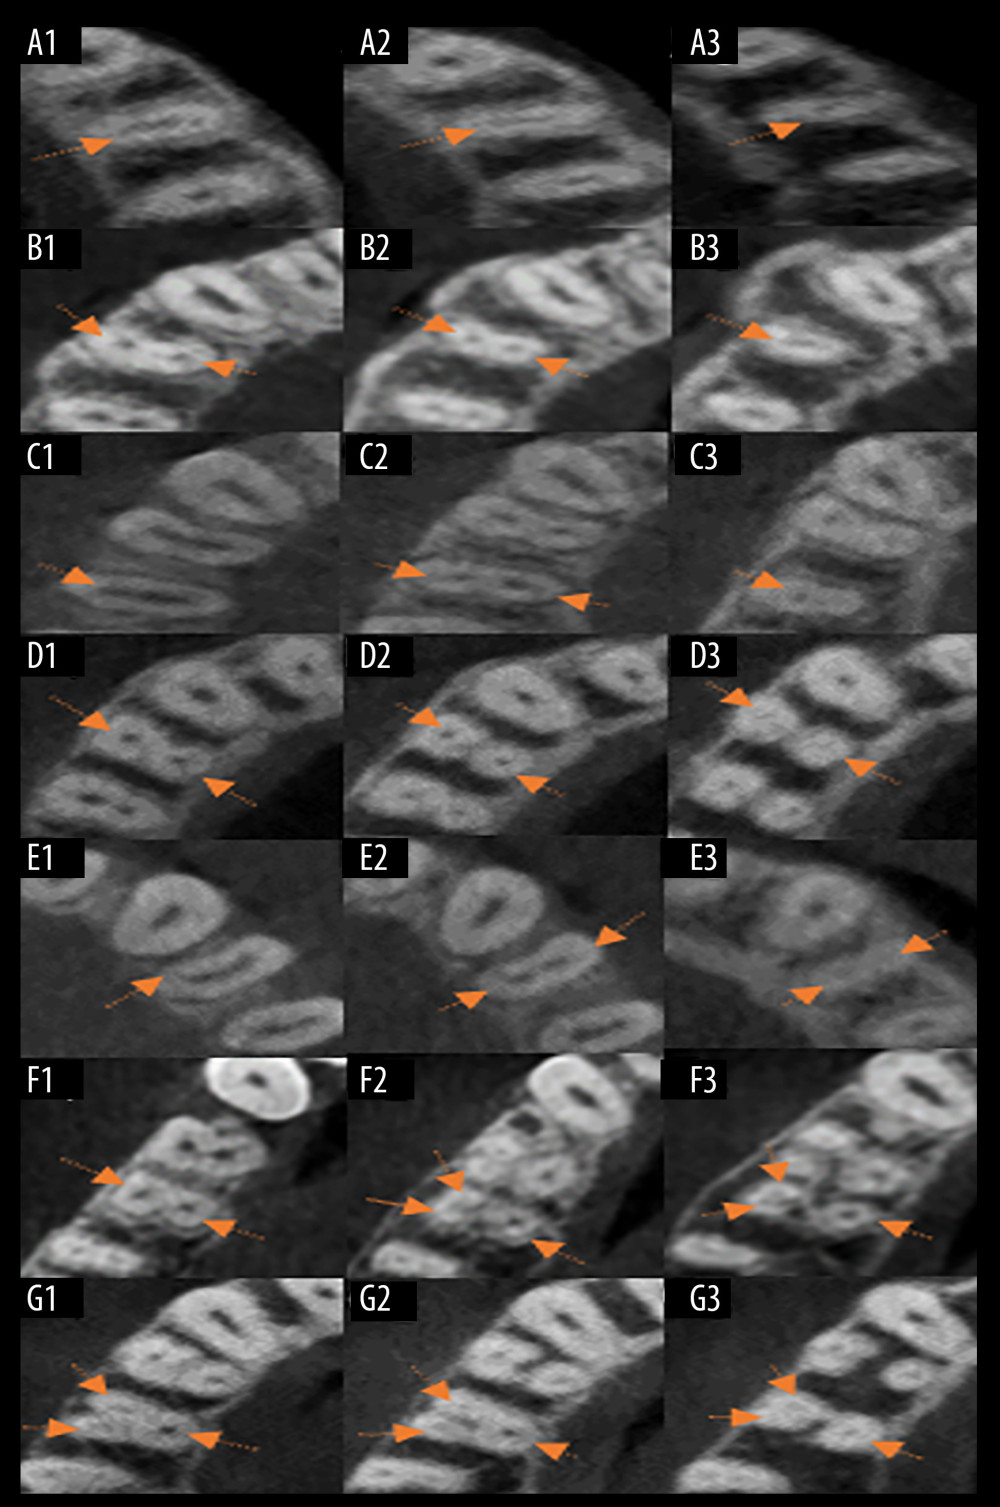 Representation of root canal classifications on axial view of CBCT. (A1–A3) Presence of single canals in the coronal, middle, and apical thirds indicated by arrows, classified as Vertucci Type I and 1TN1 Ahmed. (B1, B2) Two canals in the coronal and middle third. (B3) Only 1 canal in the apical third, indicated by arrows, classified as Type II Vertucci and 1TN2-1 Ahmed. (C1) One canal in the coronal third. (C2) Two canals in the middle third. (C3) One canal in the apical third indicated by arrows, classified as Type III Vertucci and 1TN1-2-1 Ahmed. (D1–D3) Two canals in the coronal, middle, and apical thirds indicated by arrows, classified as Type IV Vertucci and 2TNB1P1 Ahmed. (E1) One canal in the coronal third. (E2, E3) Two canals in the middle and apical third indicated by arrows, classified as Type V Vertucci and 1TN1-2 Ahmed. (F1) Two canals buccal and palatal in coronal third. (F2, F3) Two canals in buccal and 1 canal in palatal root in middle and apical thirds, indicated by arrows, classified as 2TNB1-2P1 according to Ahmed and Type XVI according to Sert and Bayirli. (G1–G3) Three canals in coronal, middle, and apical third indicated by arrows, classified as Type VIII Vertucci and 3TNMB1DB1P1Ahmed.